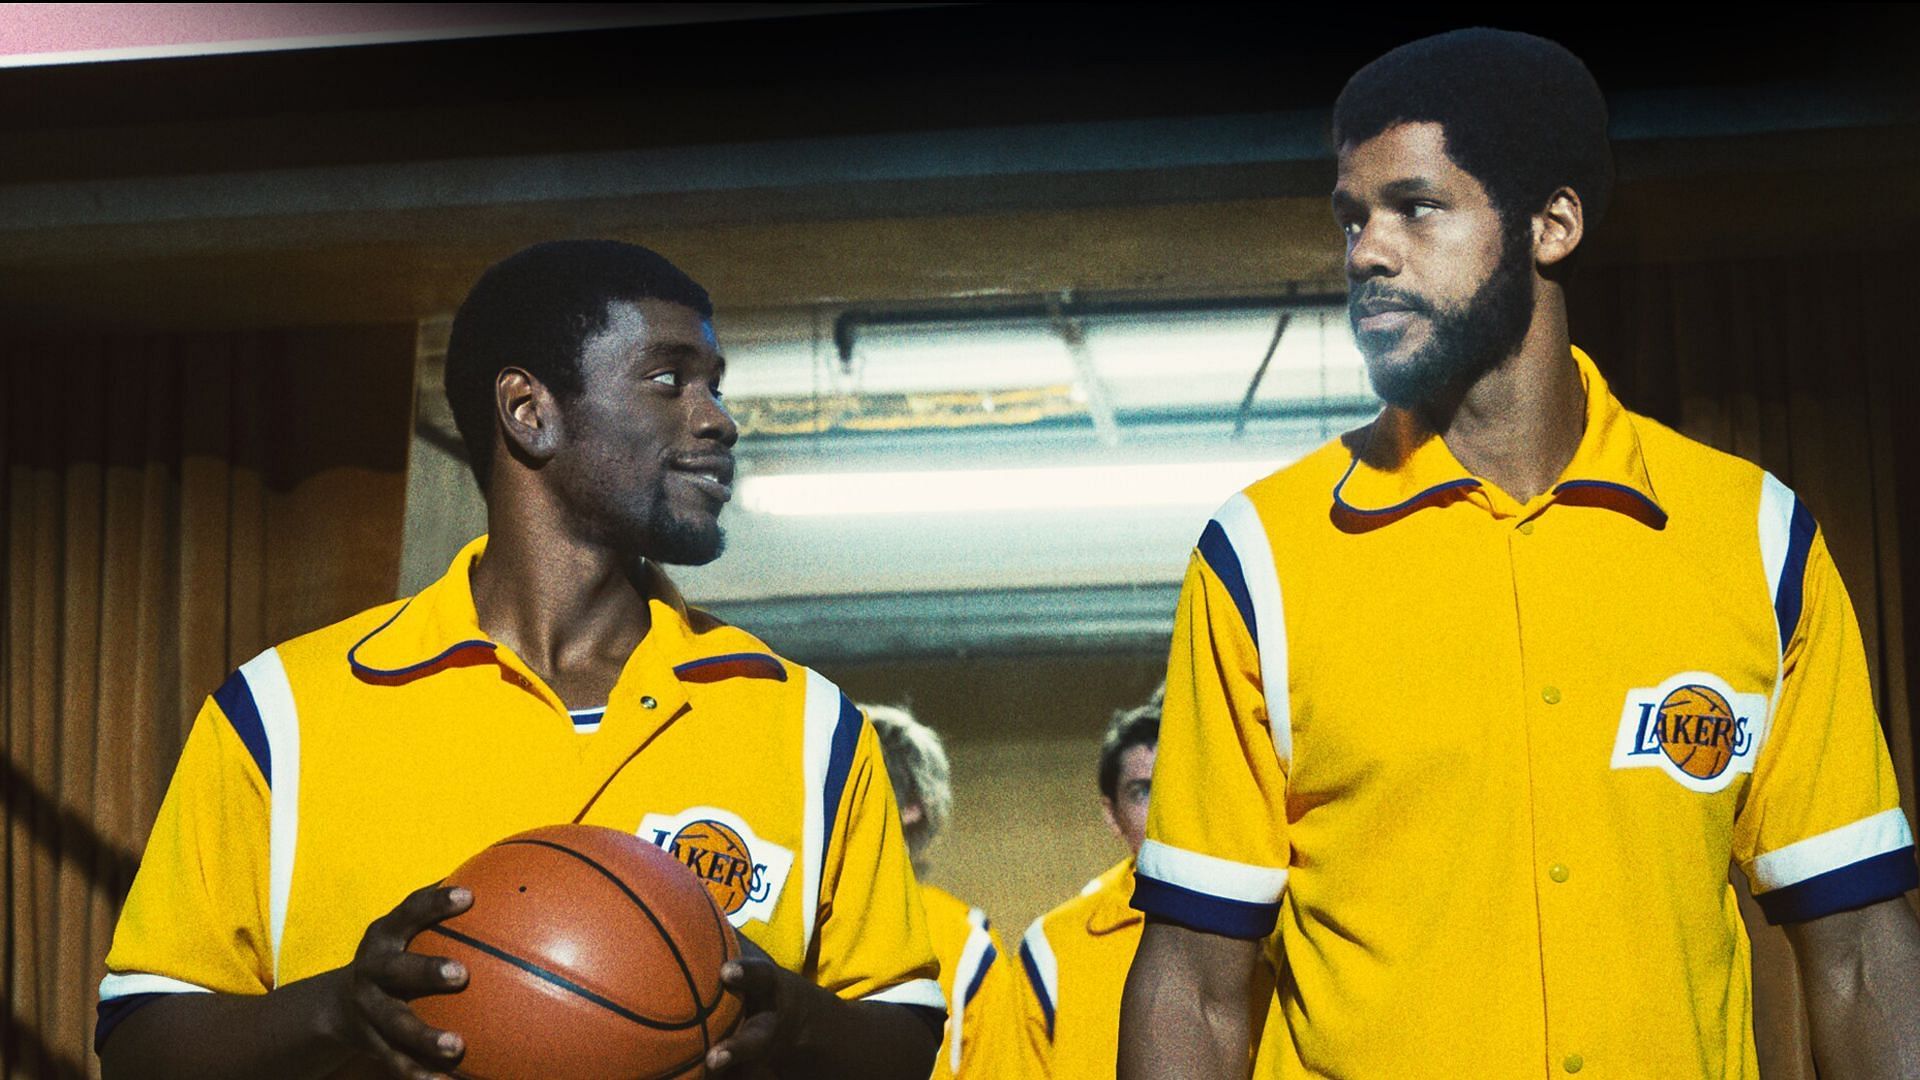 HBO&#039;s &#039;Winning Time&#039; documentary series on the LA Lakers&#039; 1980s Showtime dynasty